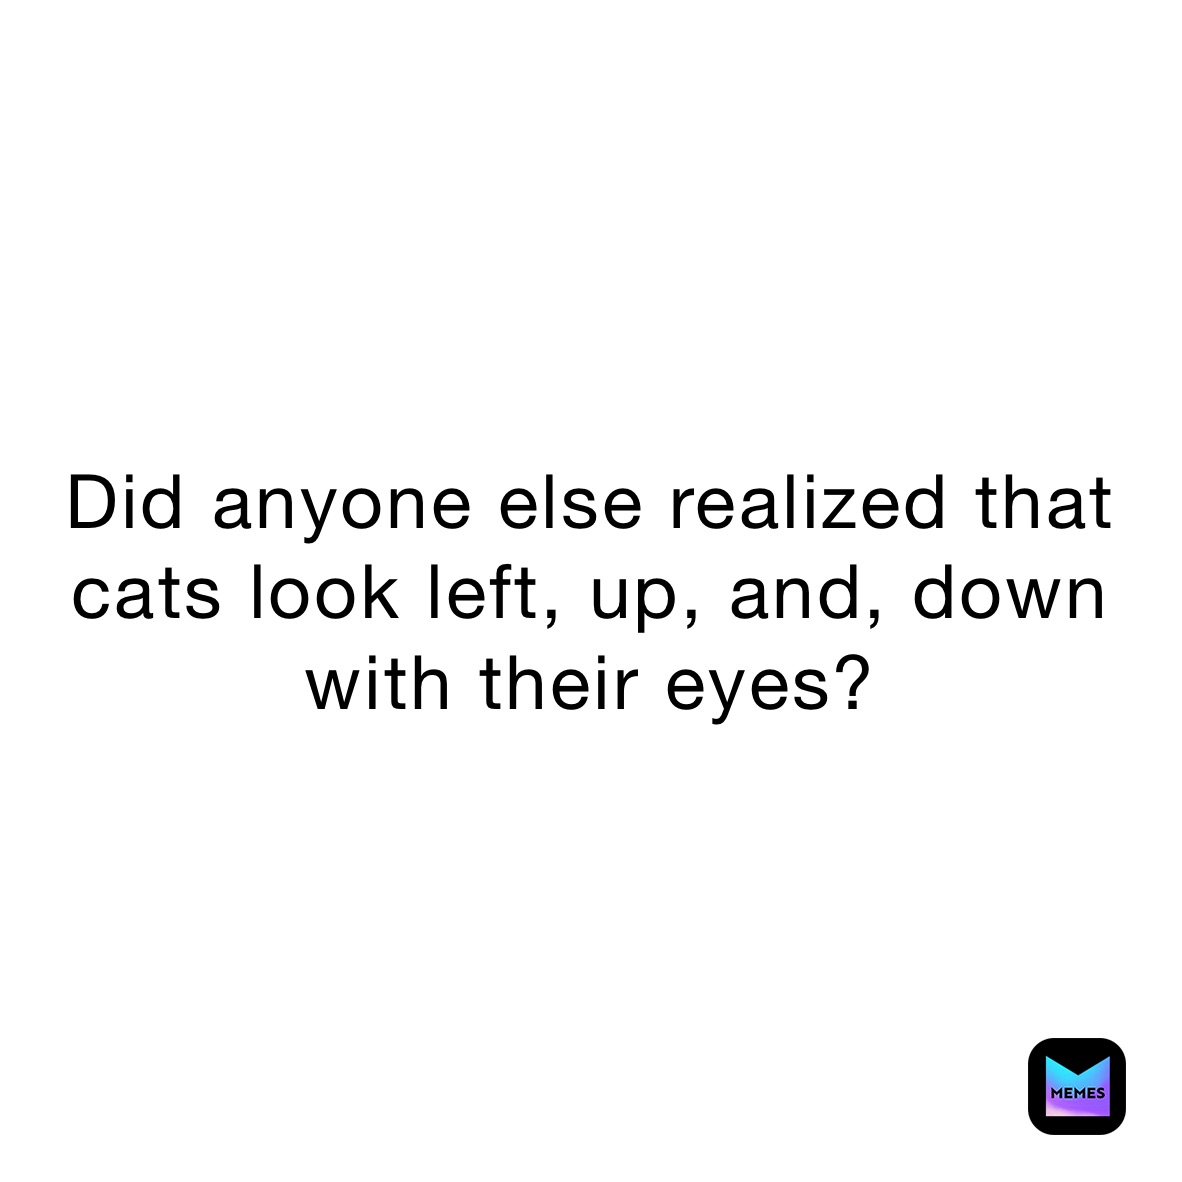 Did anyone else realized that cats look left, up, and, down with their eyes?